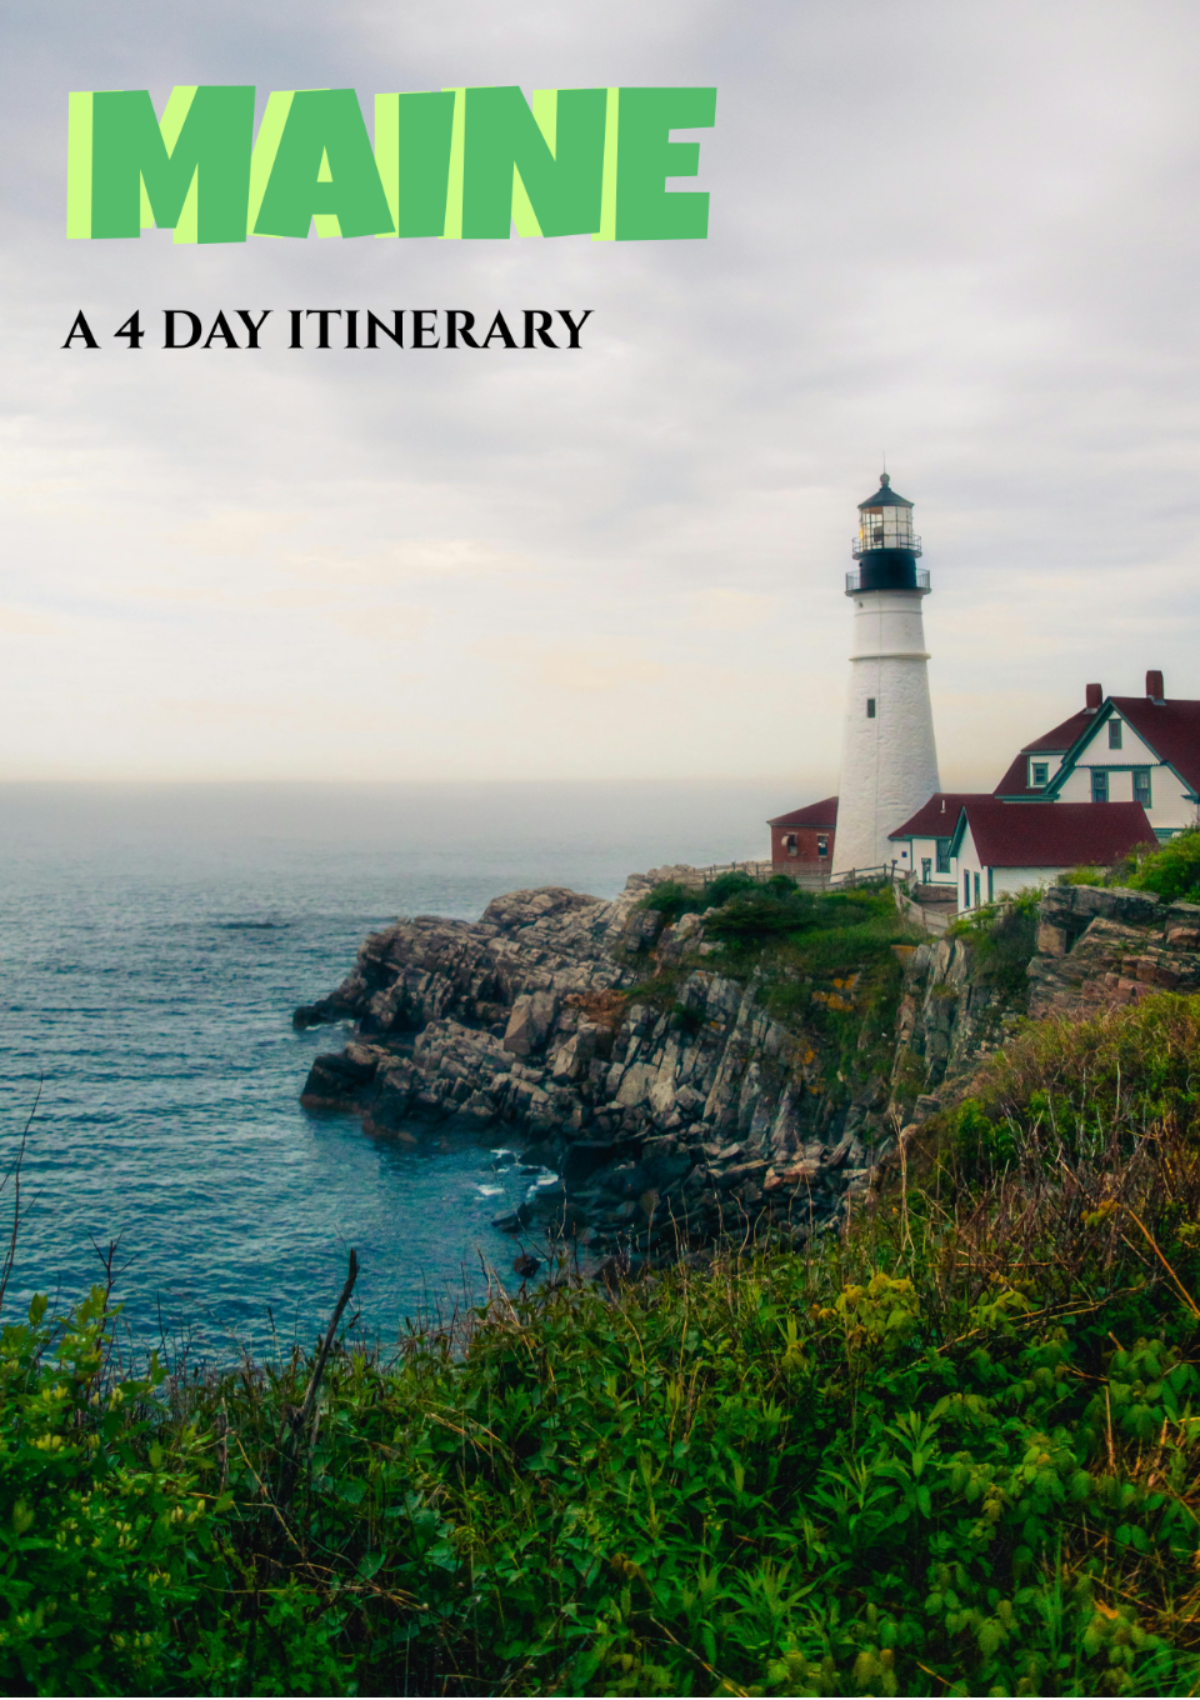 4 Day Maine Itinerary Template